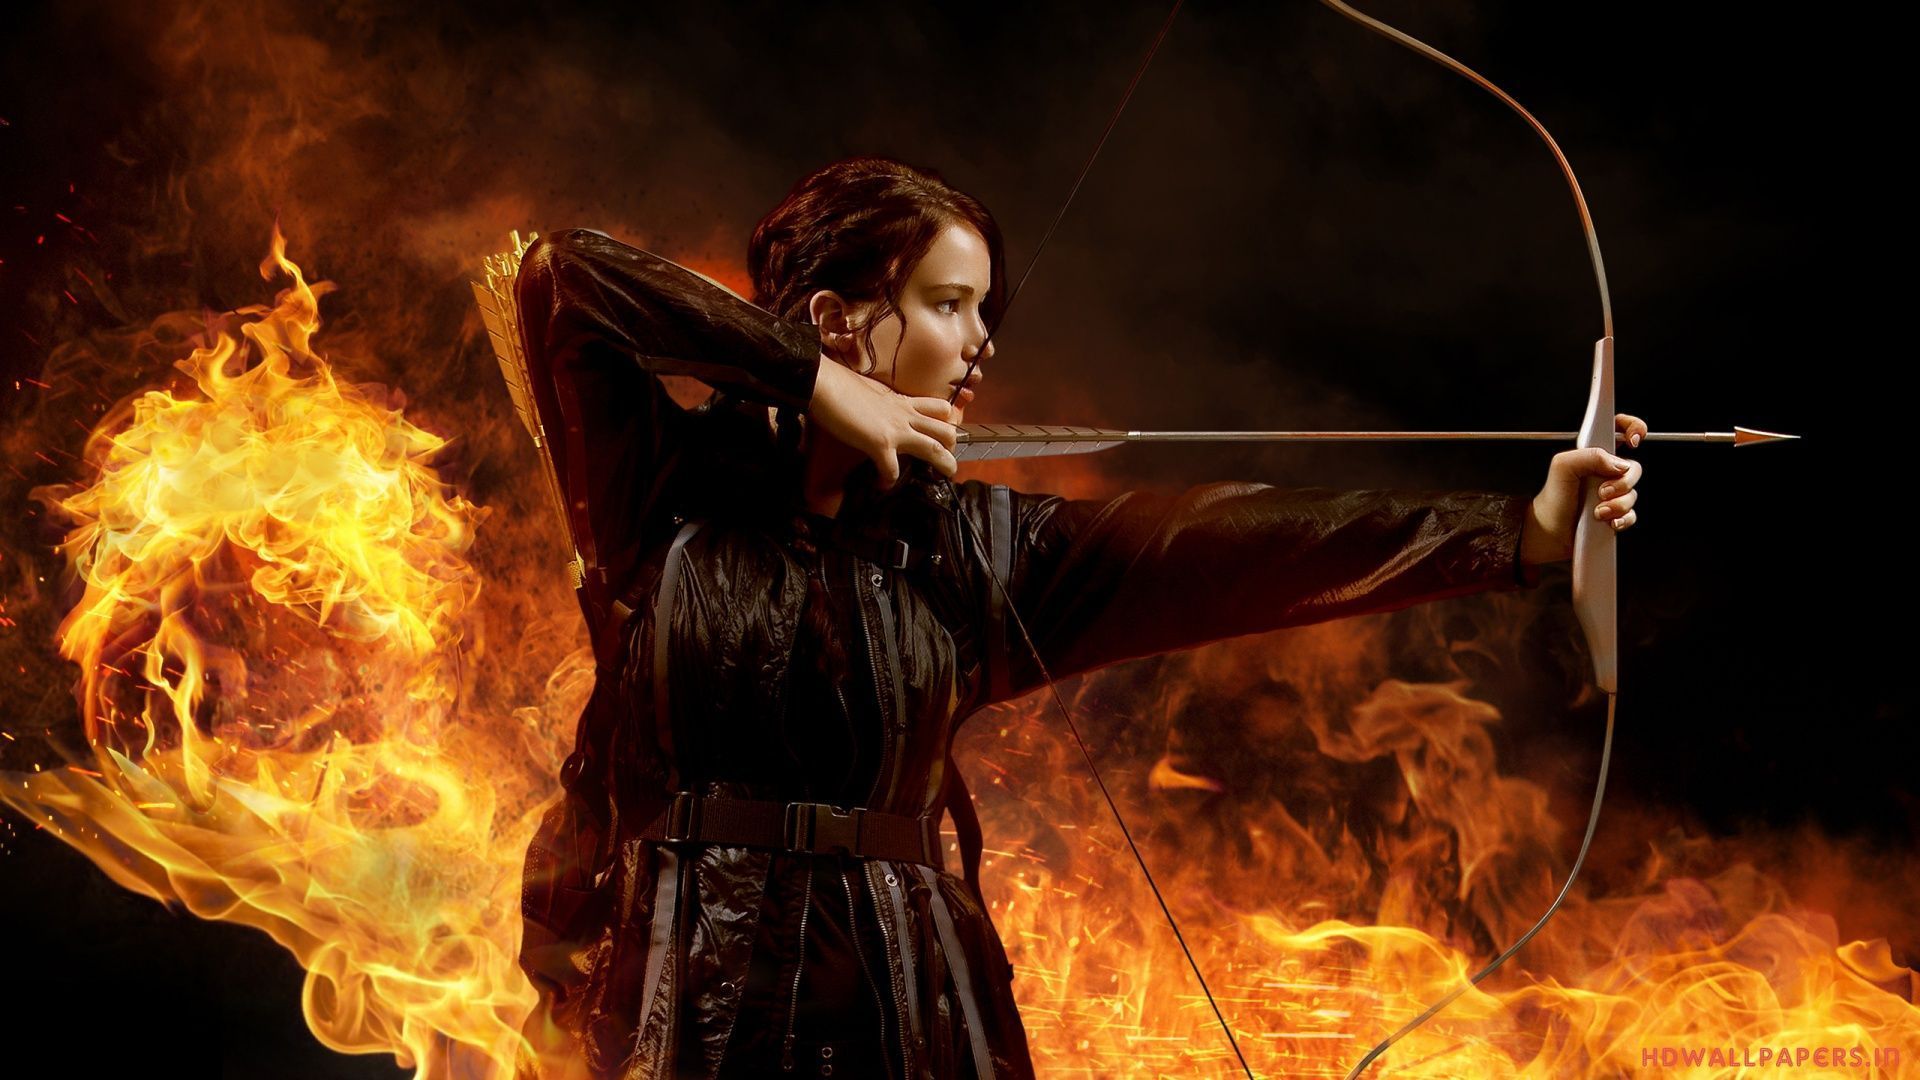 Hunger Games wallpapers